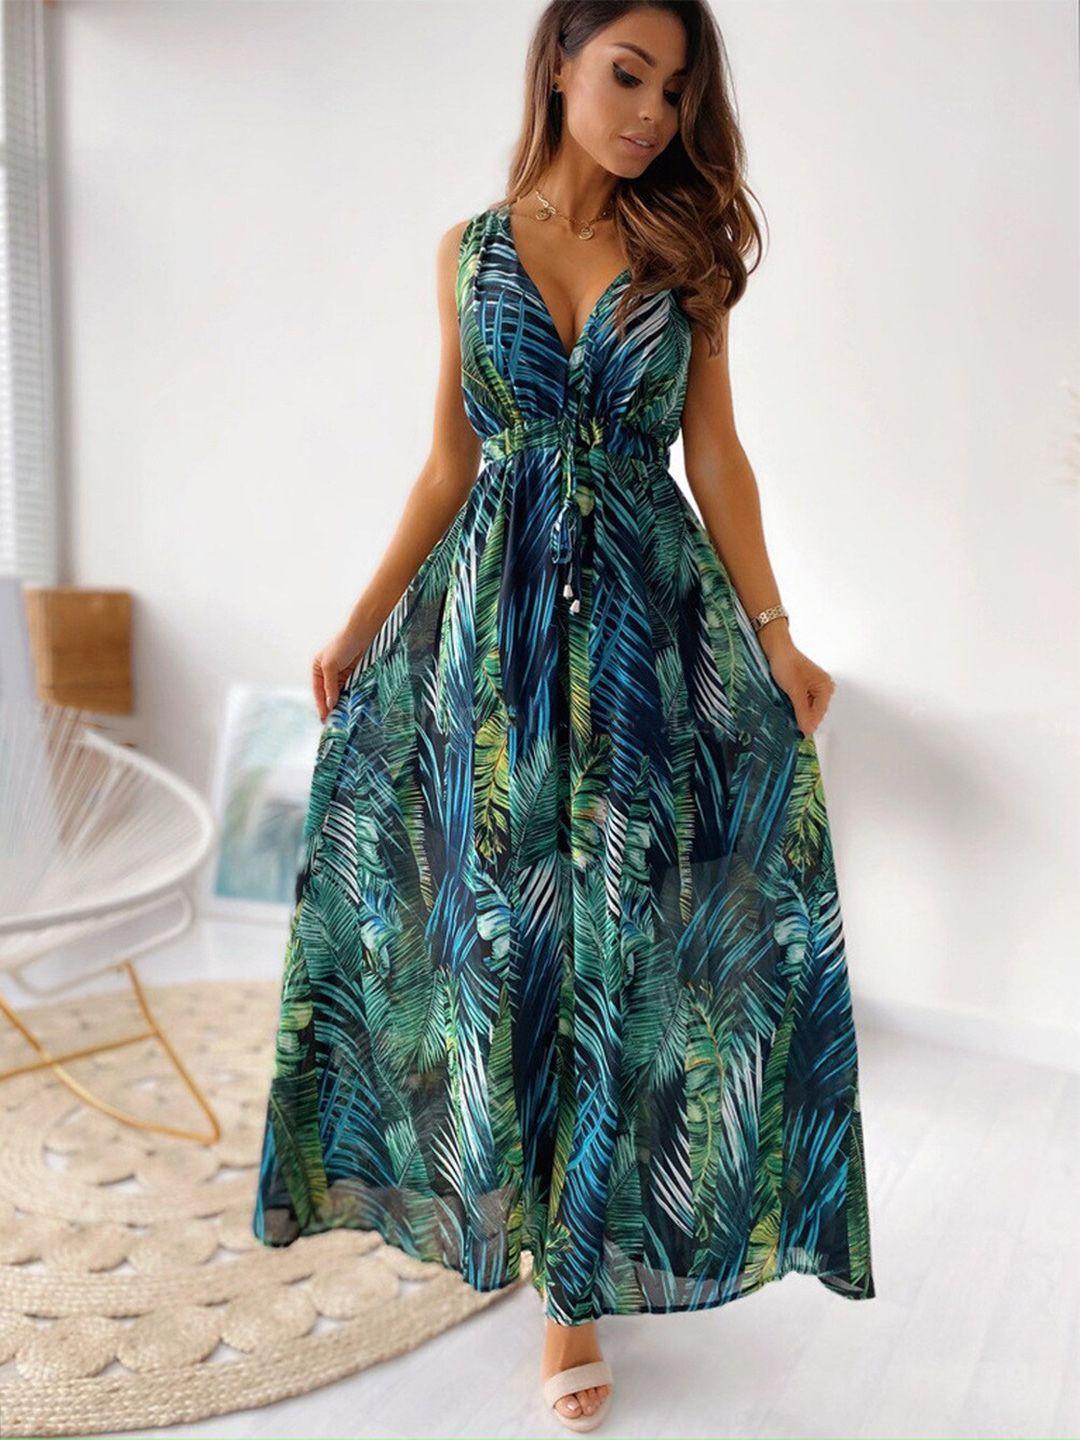 stylecast green tropical printed maxi dress